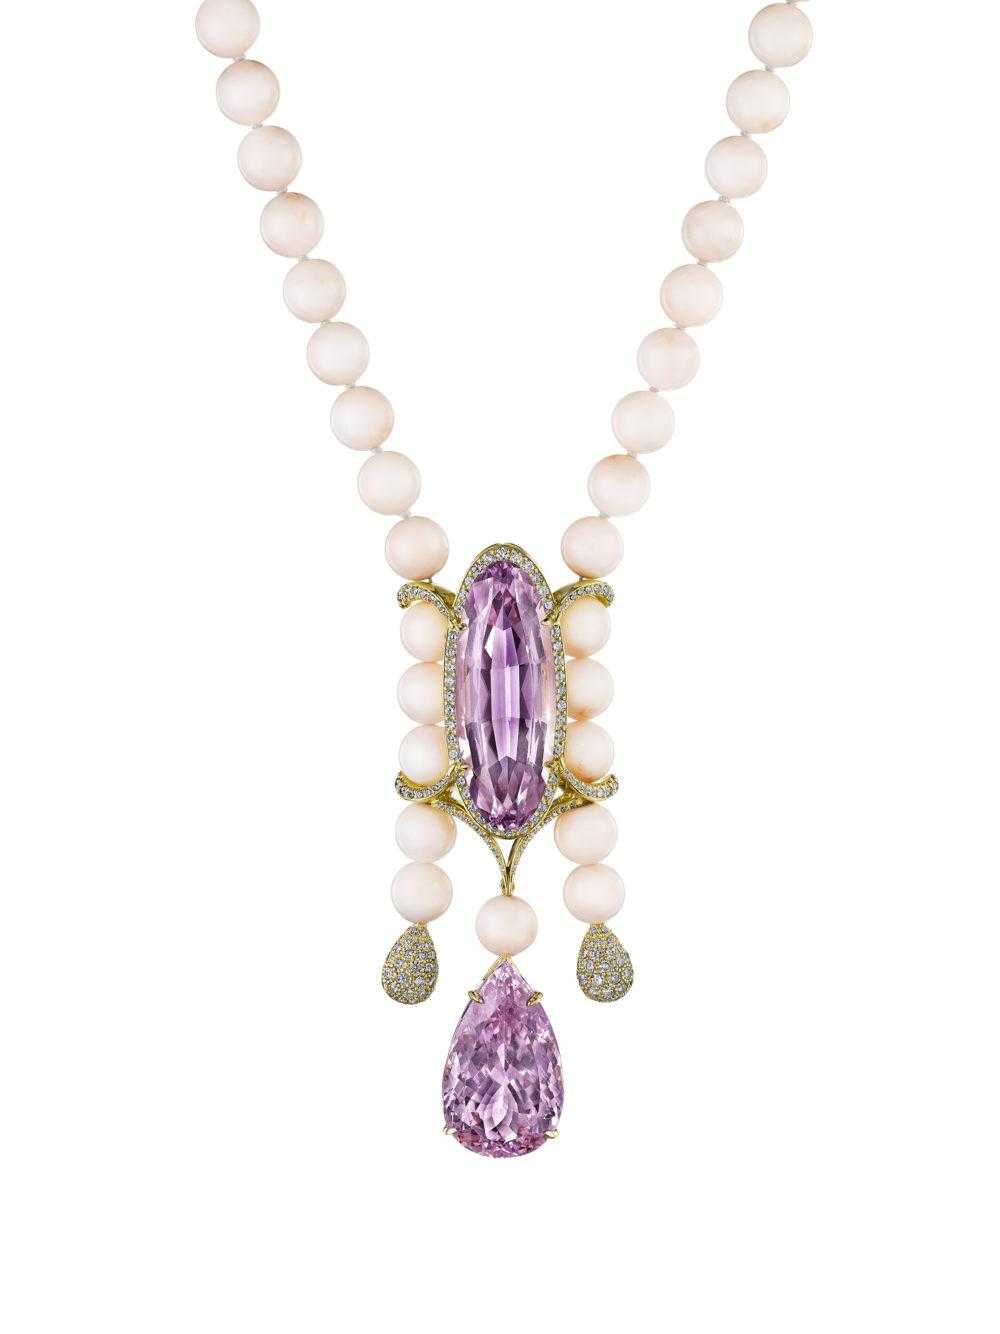 one-of-a-kind-kunzite-coral-necklace-high-end-jewelry-luxury-jewelry-hammerman-jewels